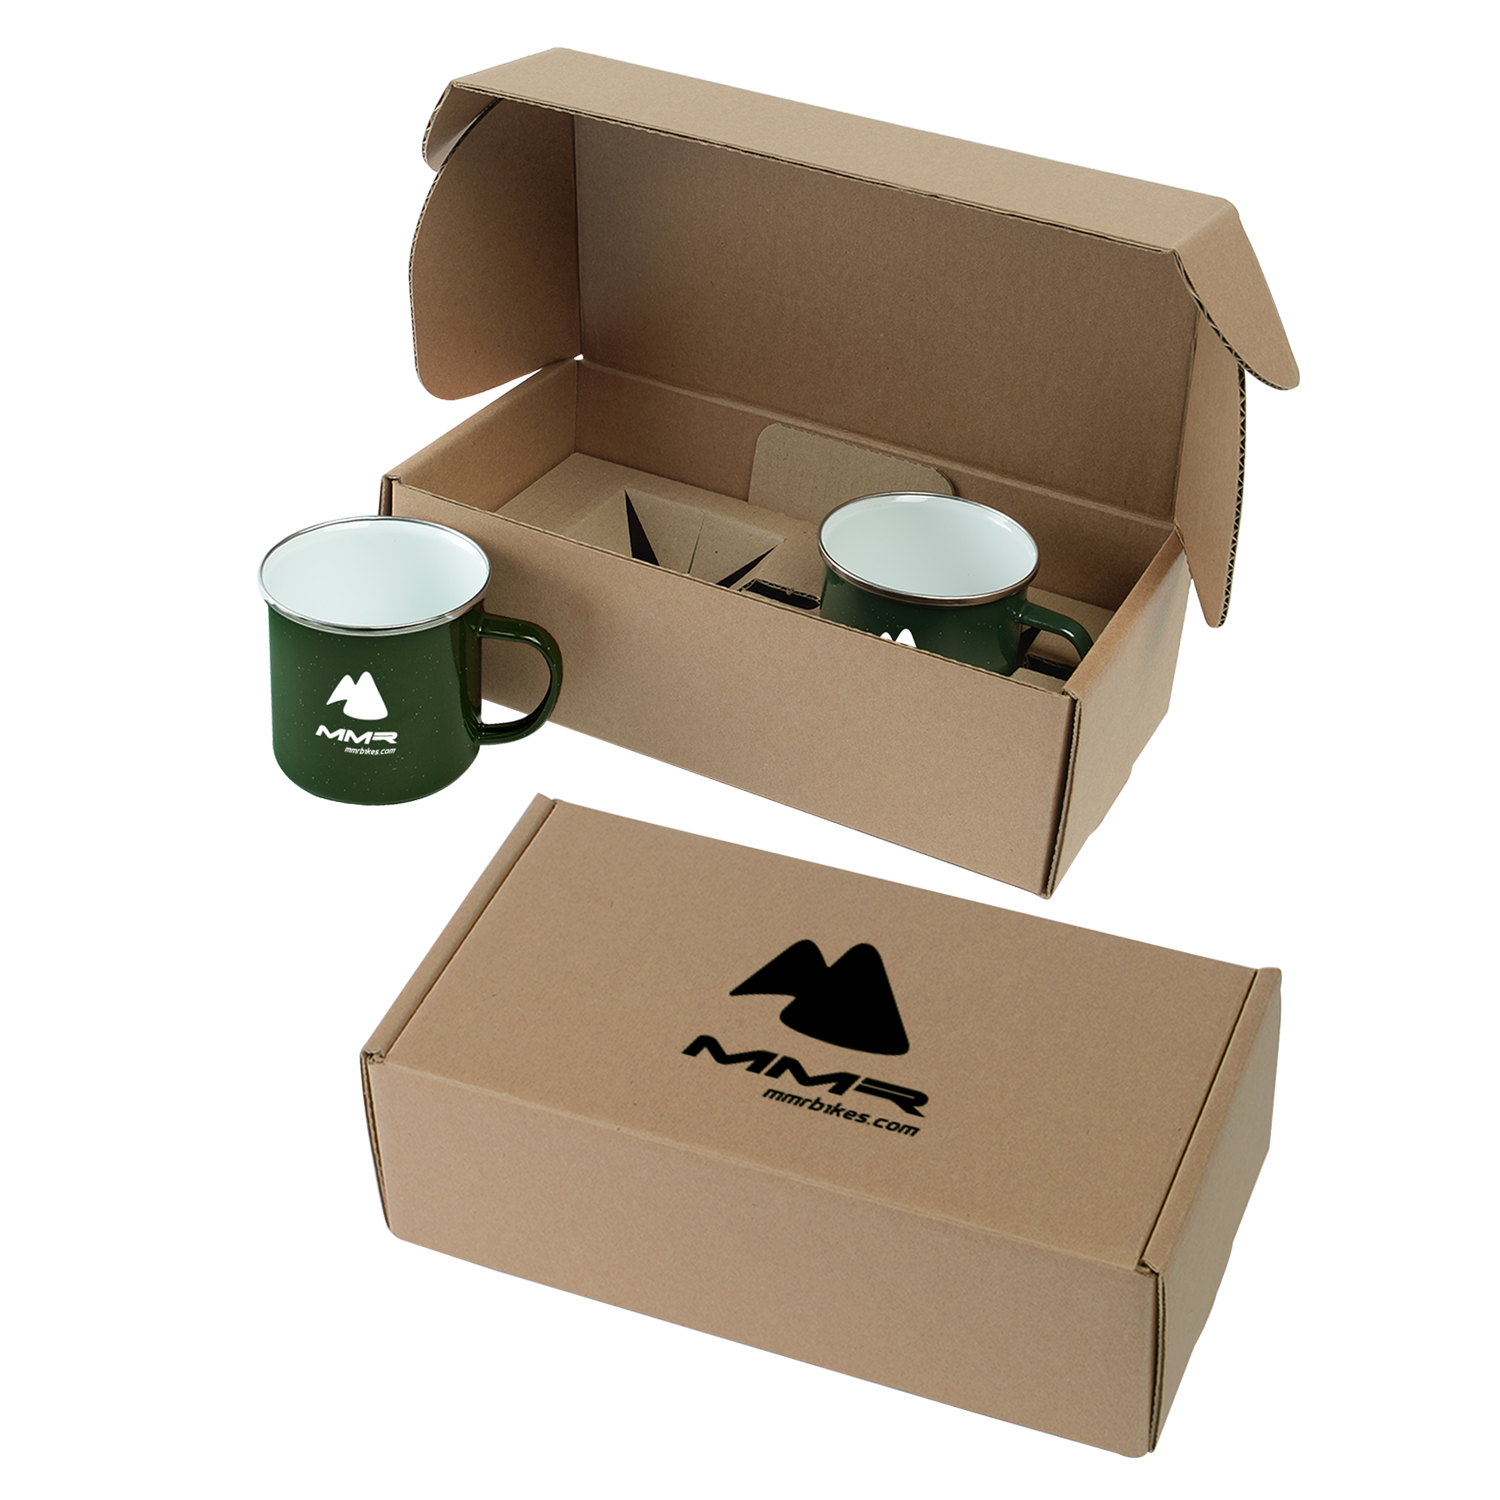 16 oz Speckle-It™ Camping Mugs Gift Box Set